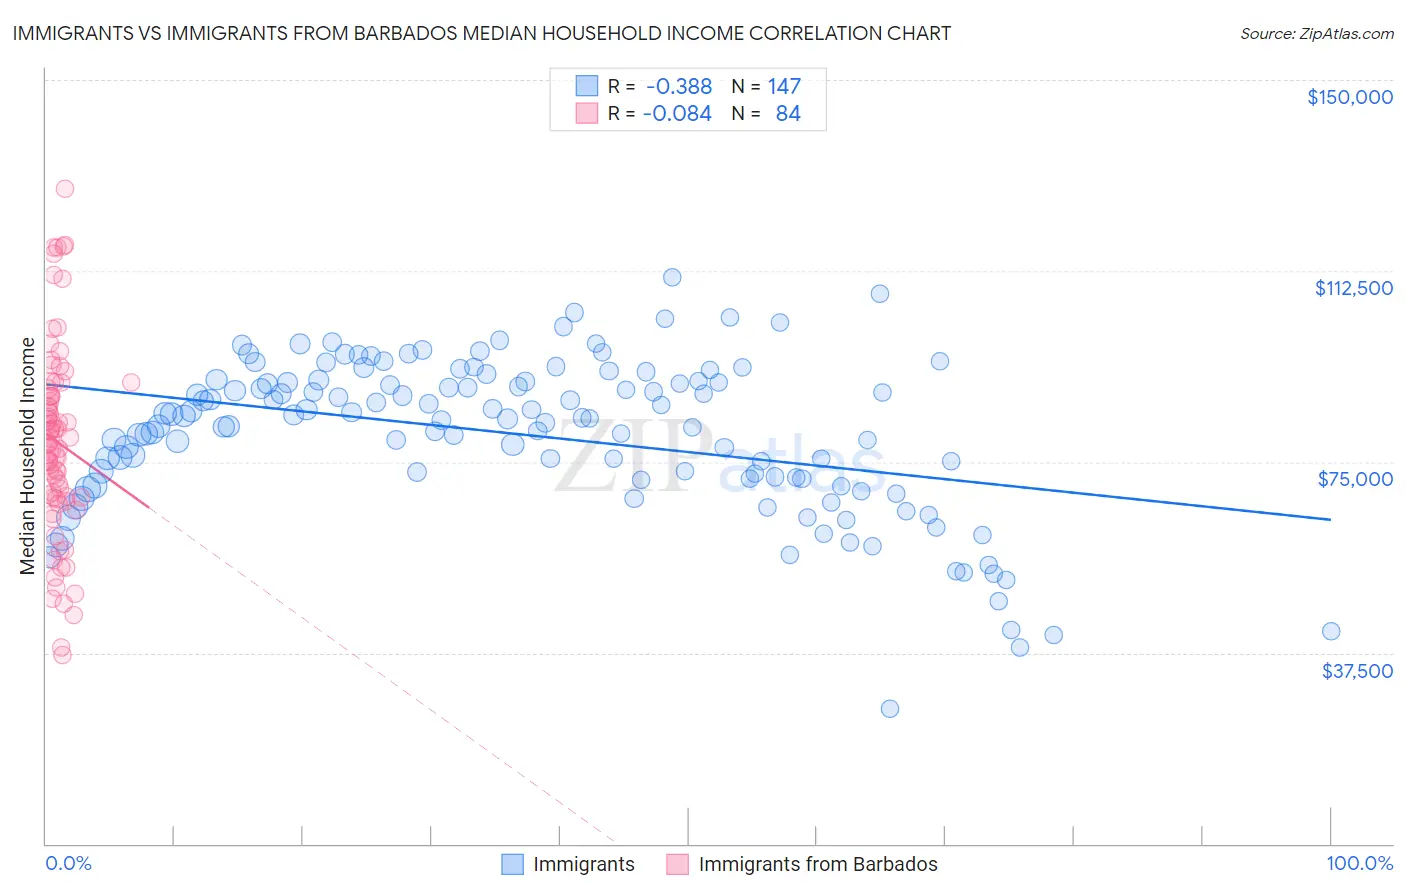 Immigrants vs Immigrants from Barbados Median Household Income